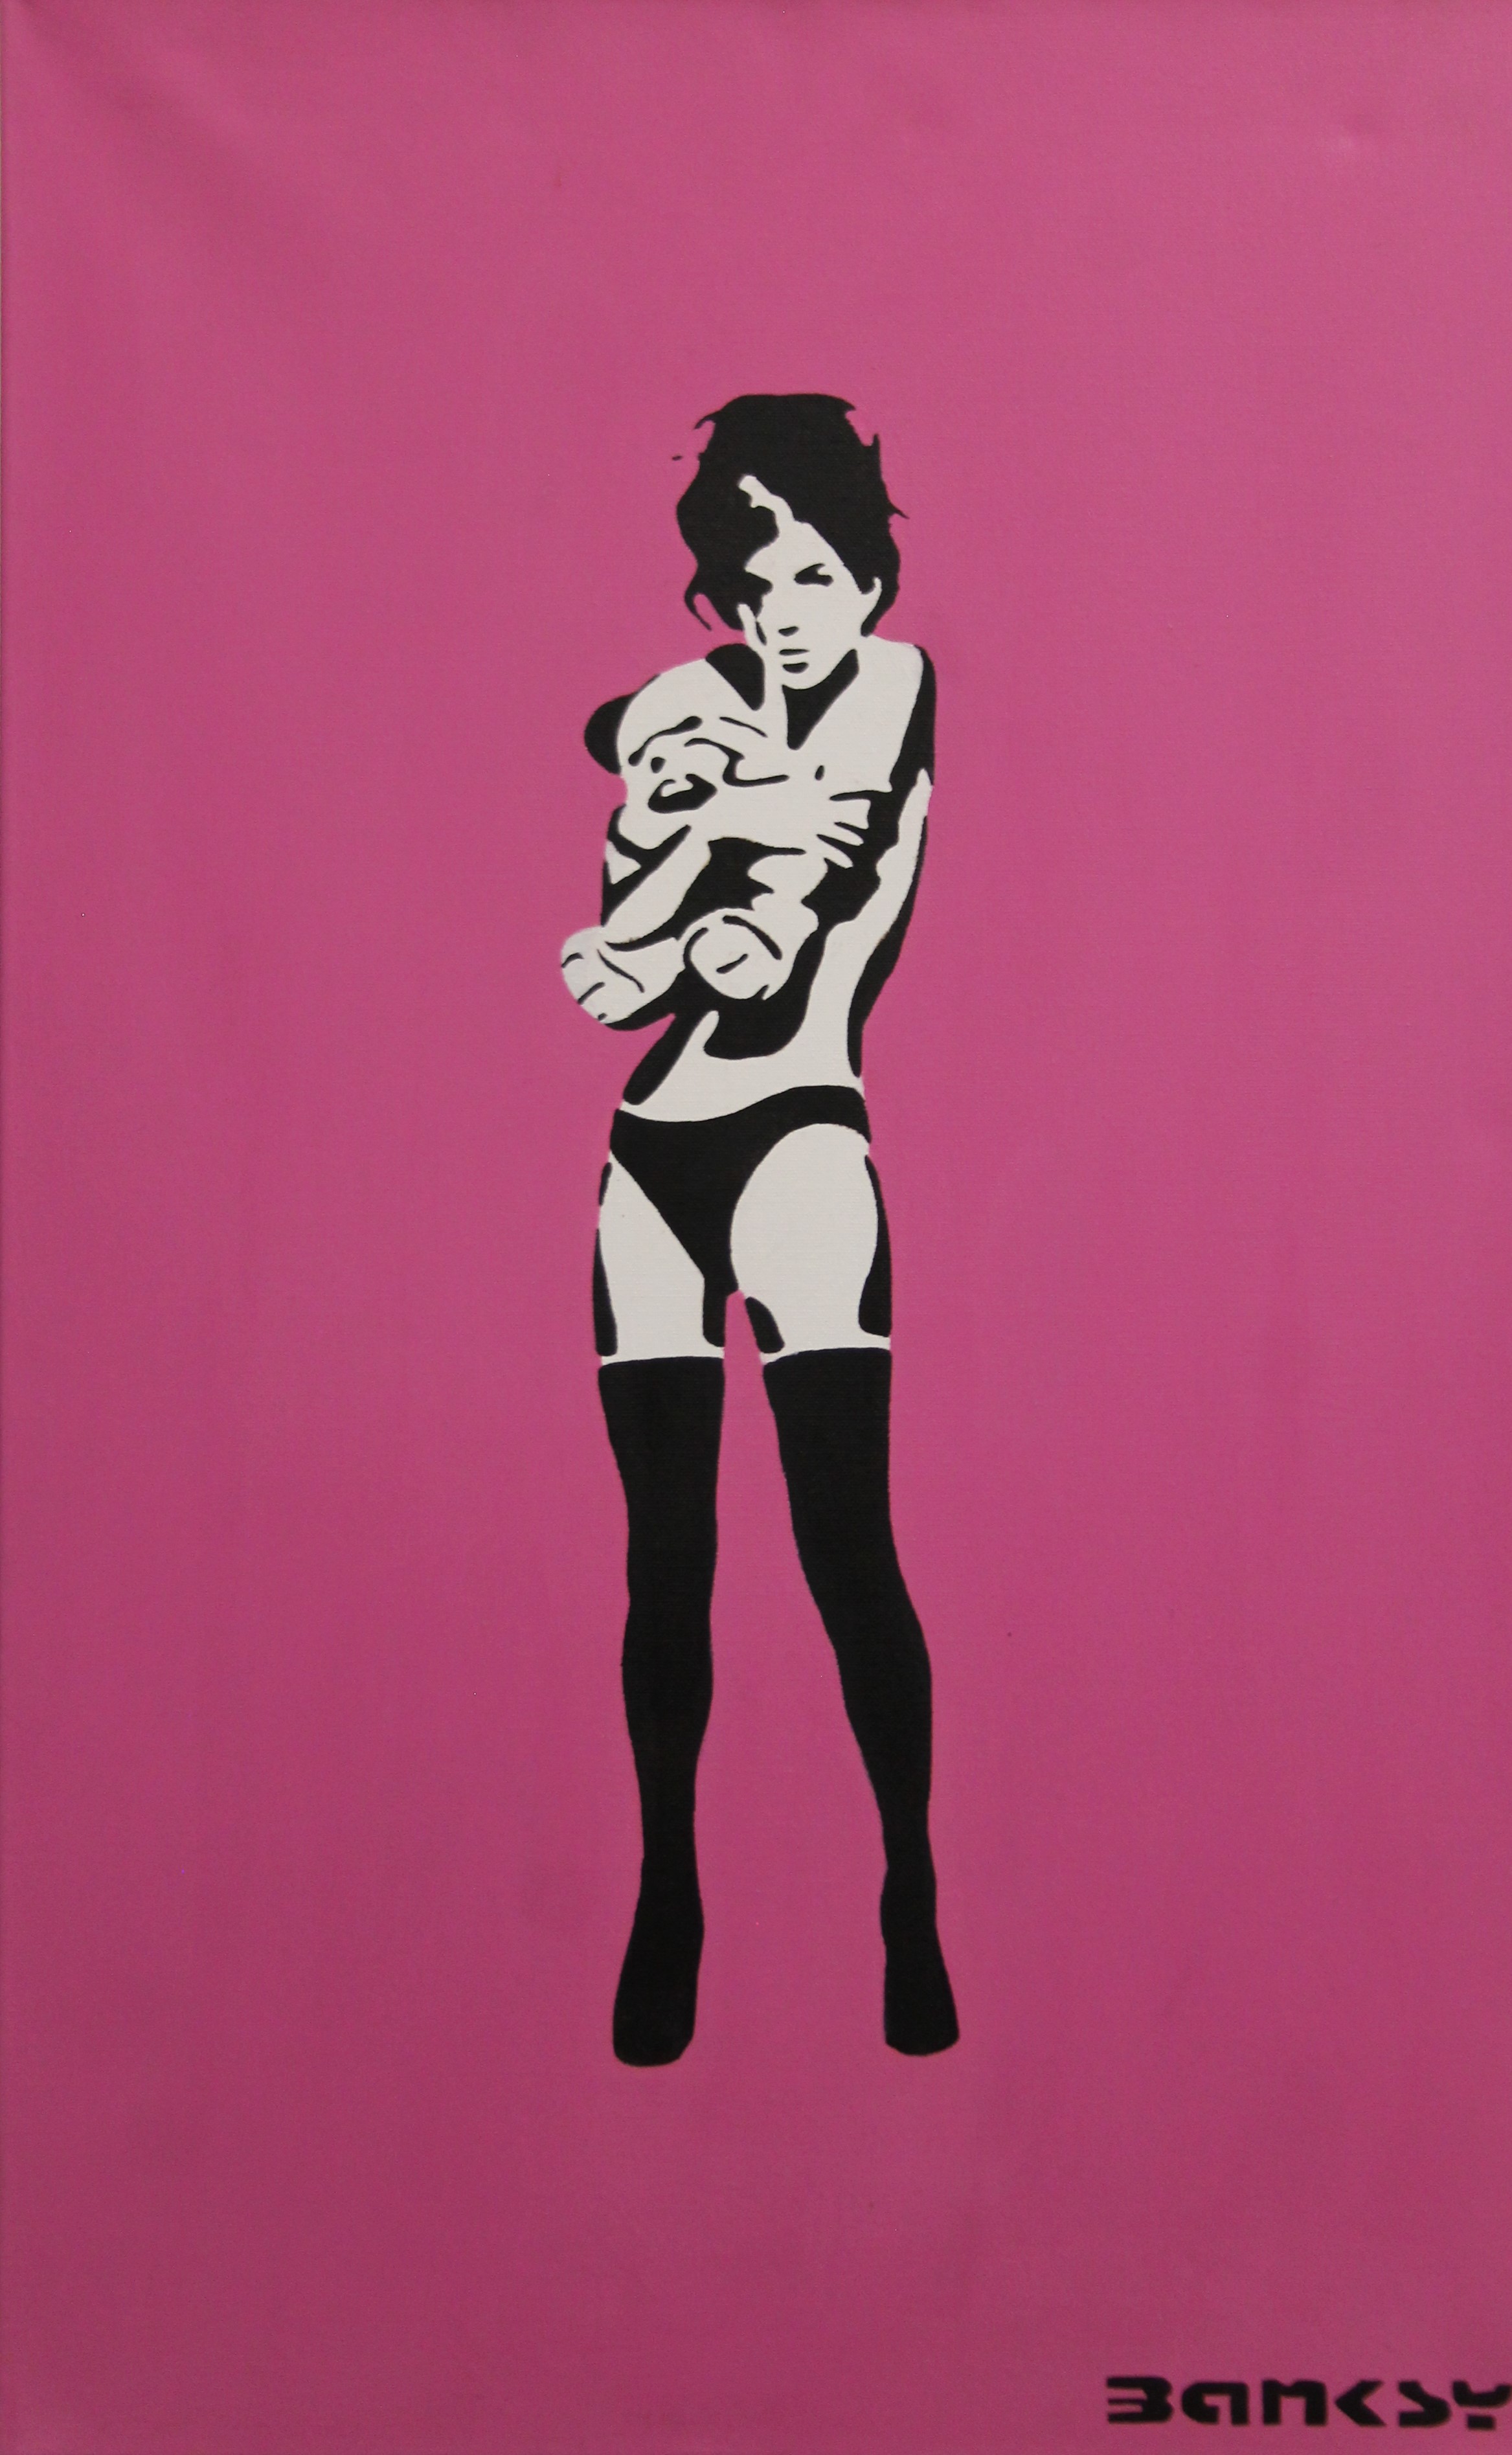 After BANKSY, Sexy Girl Hugging Teddy Bear, painting on pink canvas. 49.5 x 79.5 cm.